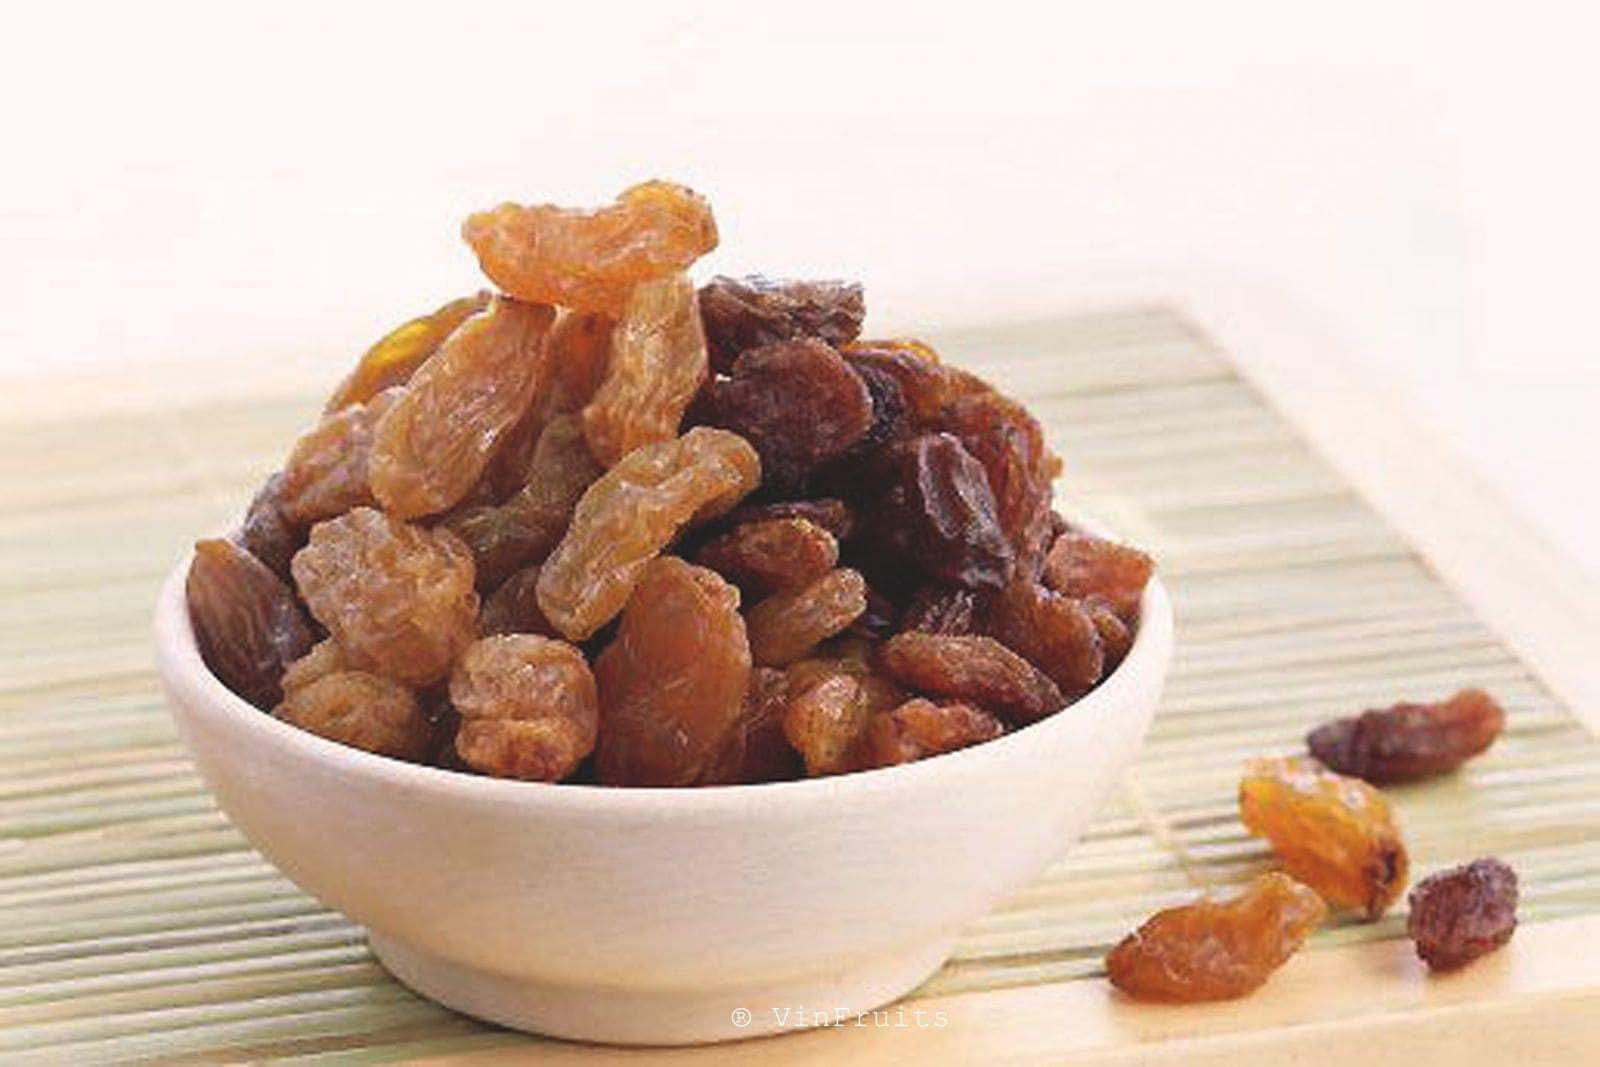 Dried grapes are very popular